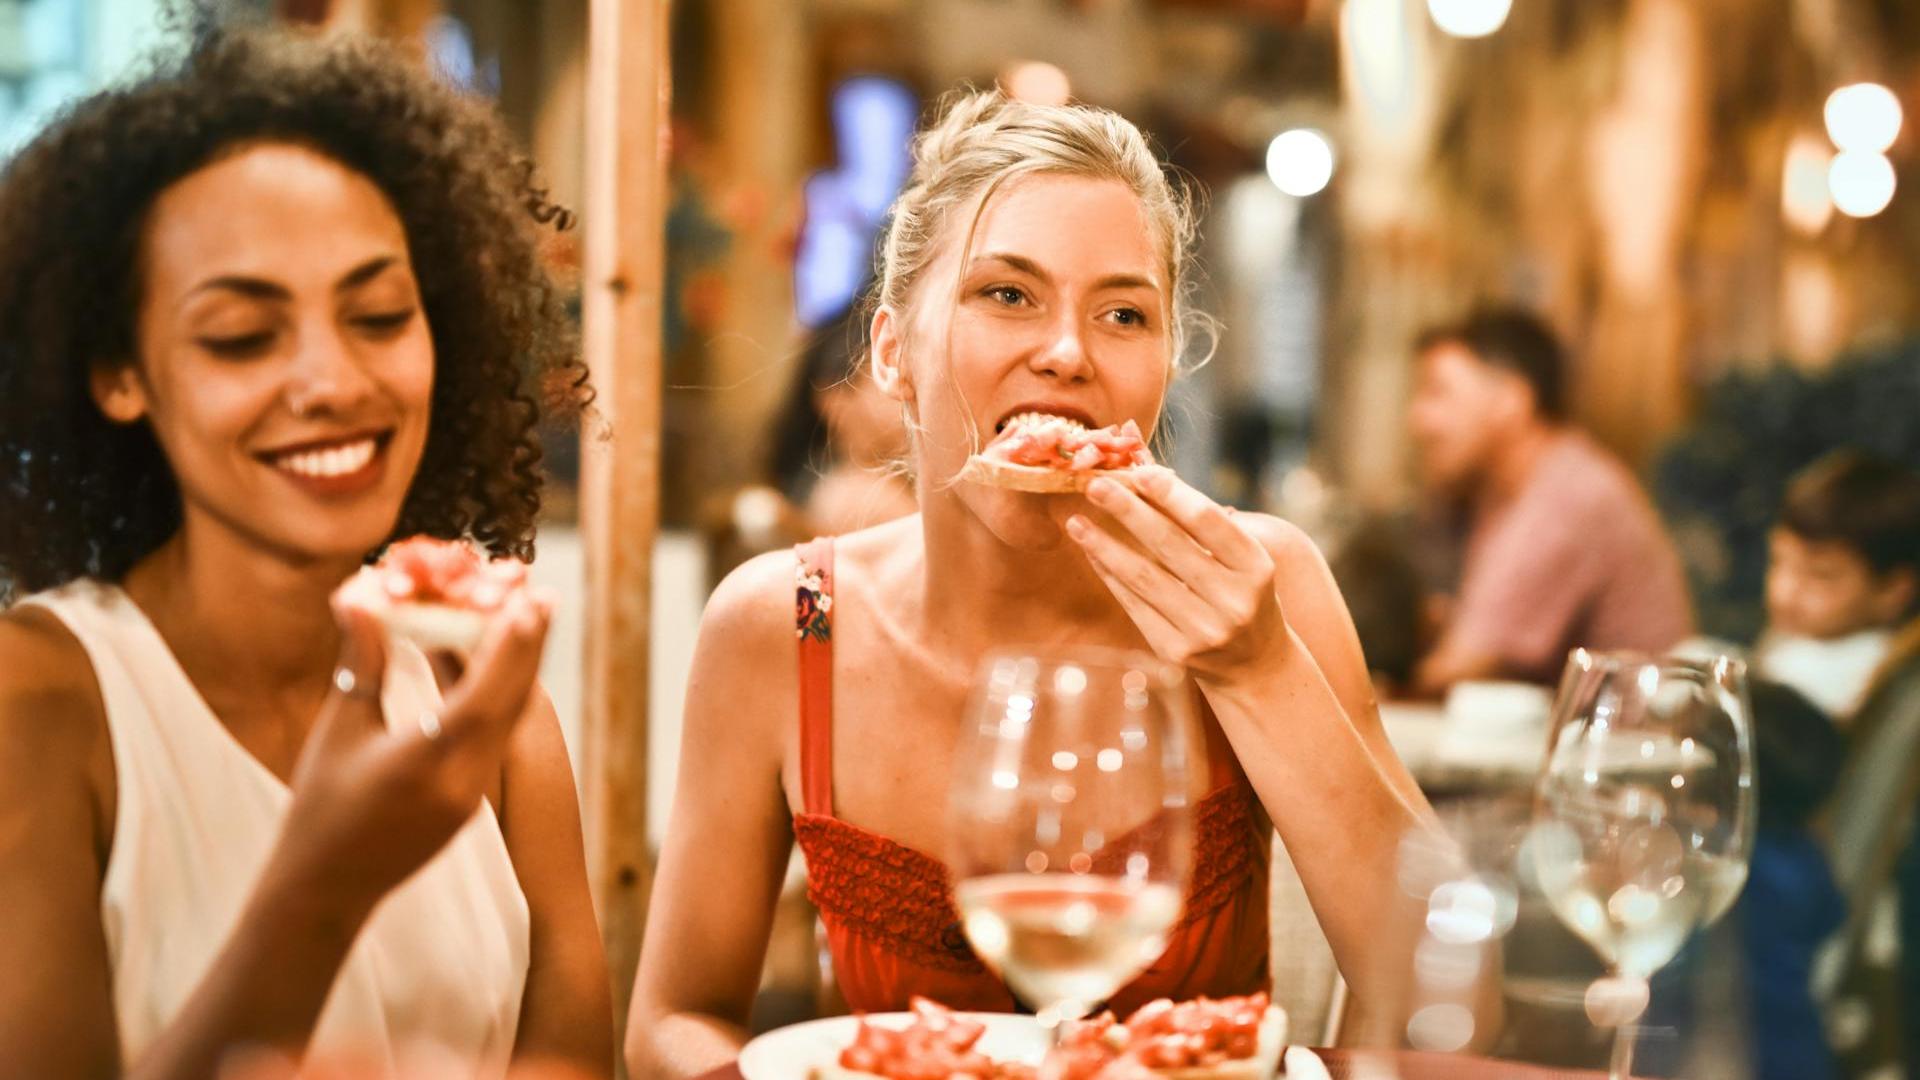 young girls eating in a restaurant